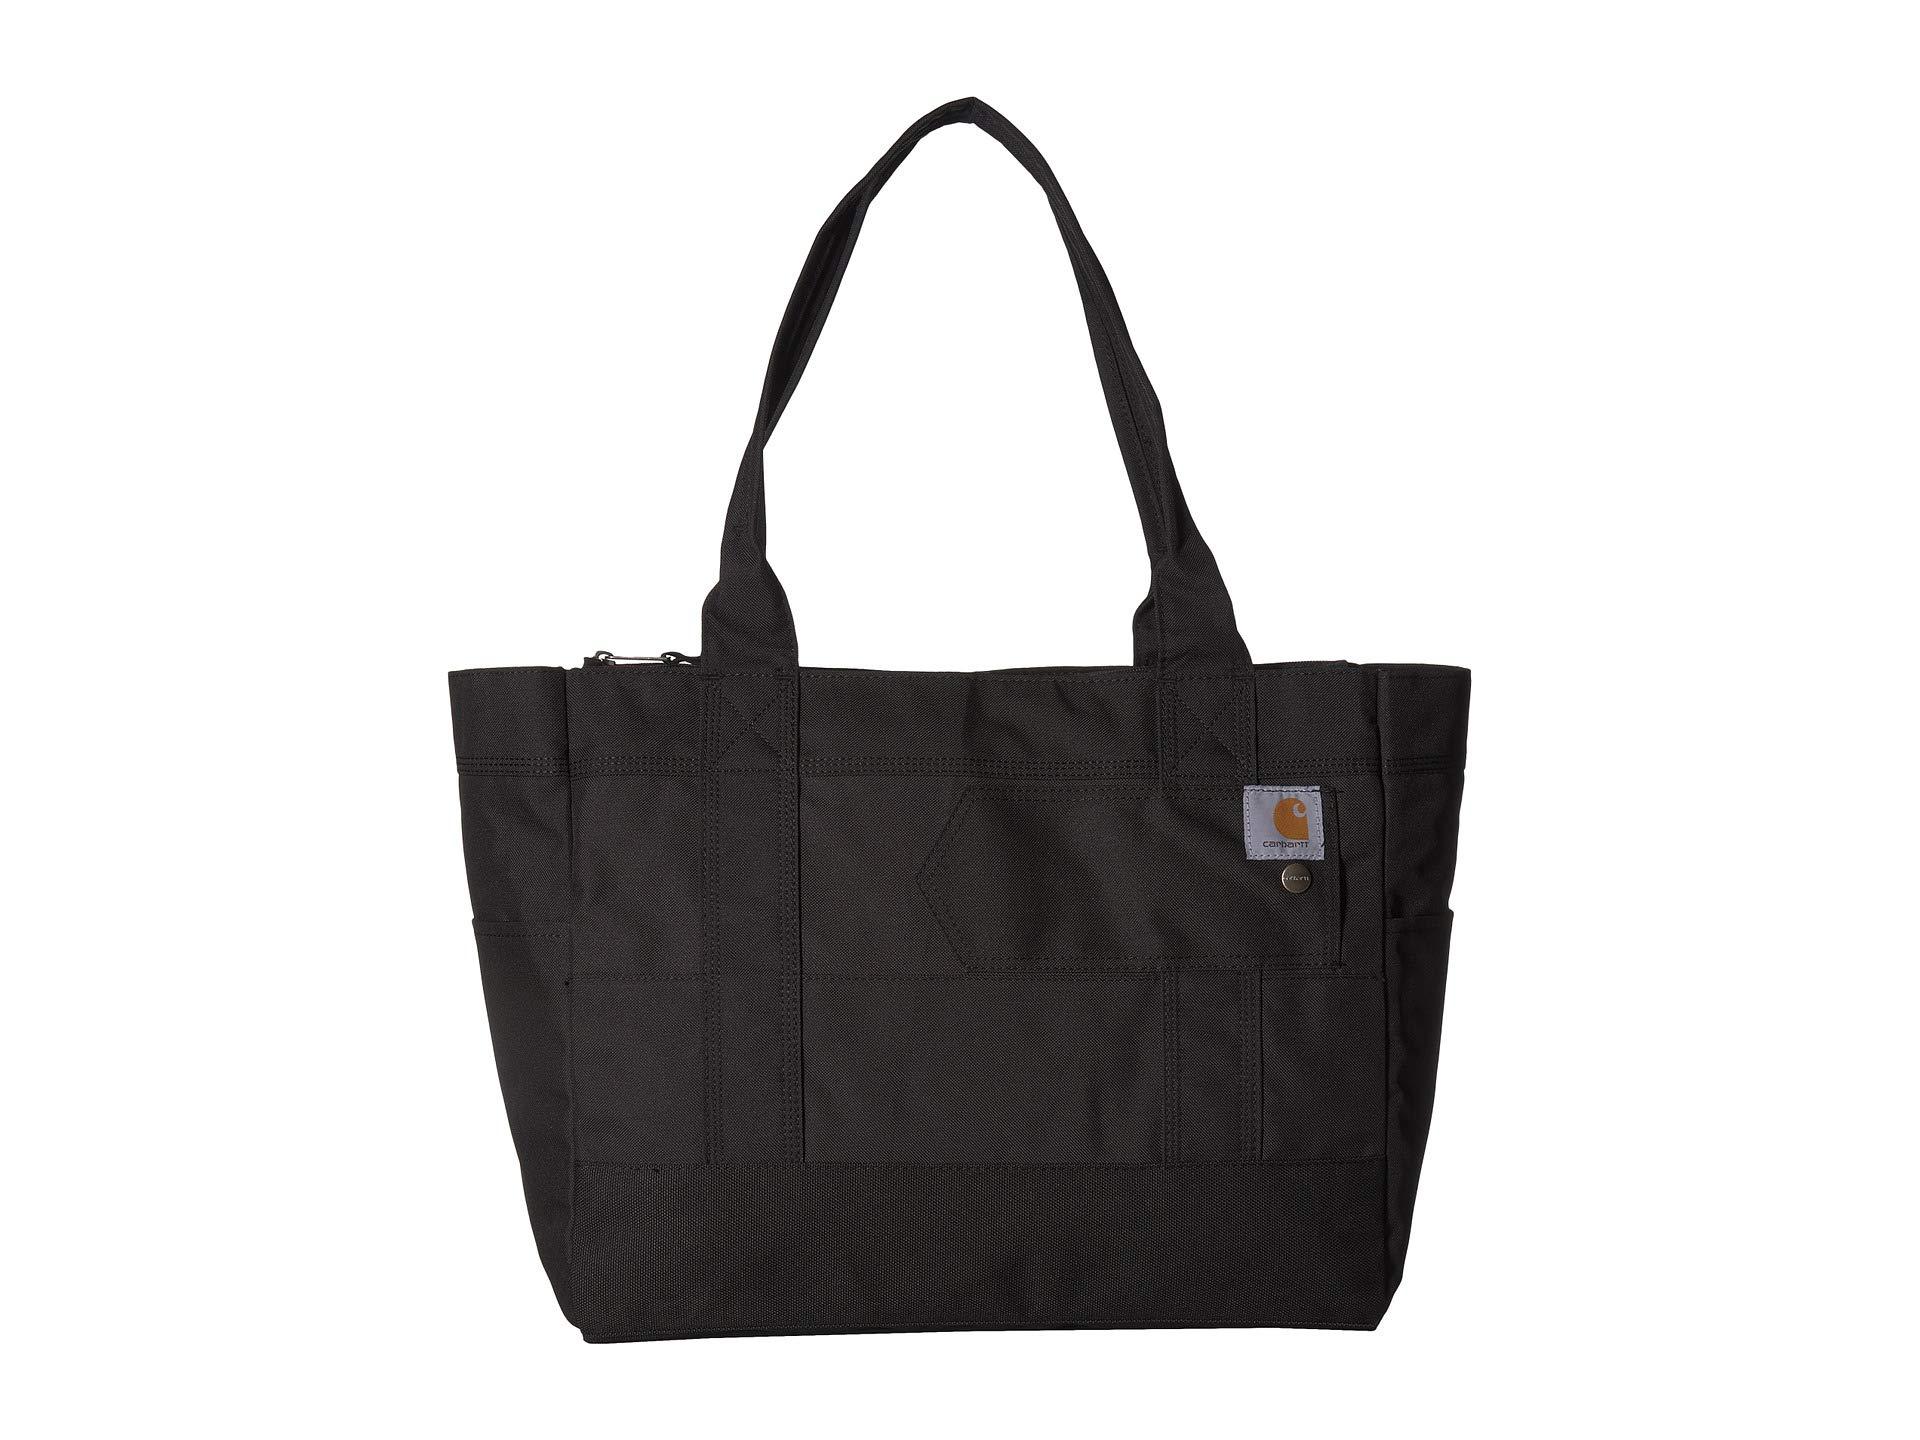 Carhartt Synthetic Legacy East West Tote in Black - Lyst